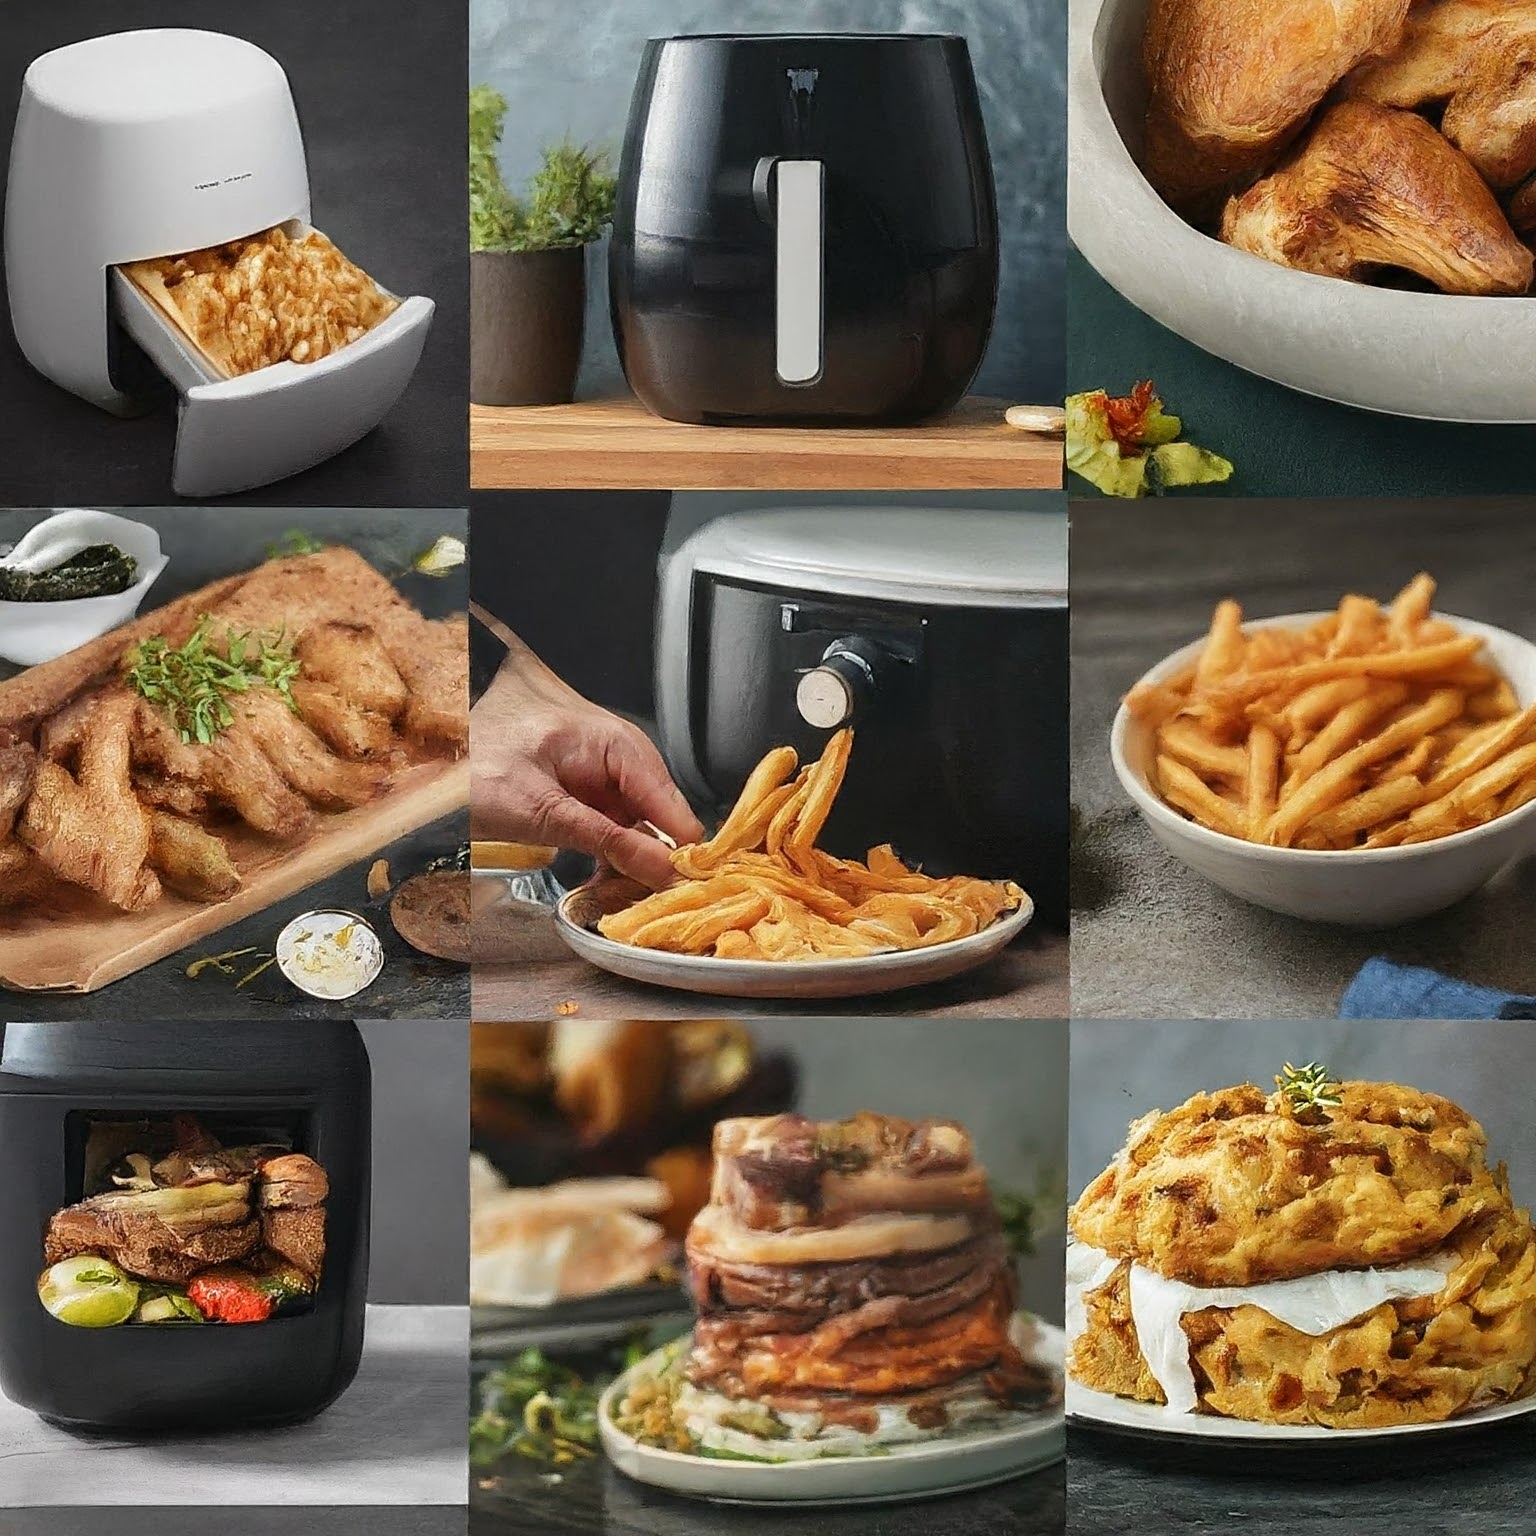 Healthy Eating Made Easy: How Air Fryer Recipes Can Transform Your Meals